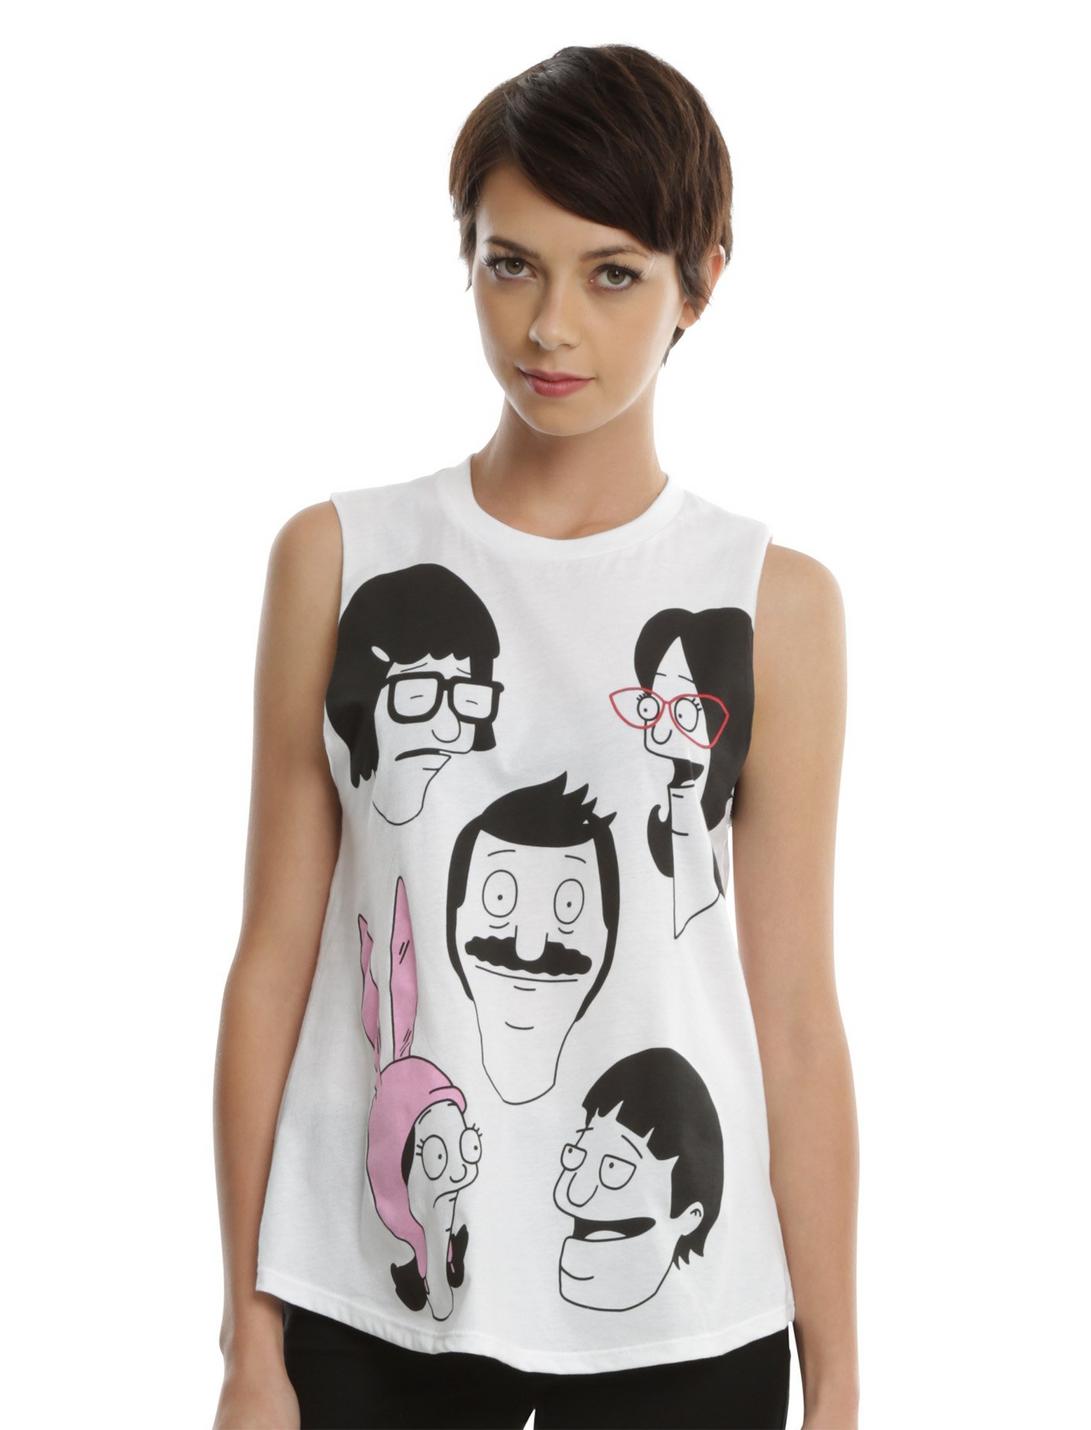 Bob's Burgers Faces Girls Muscle Top, WHITE, hi-res